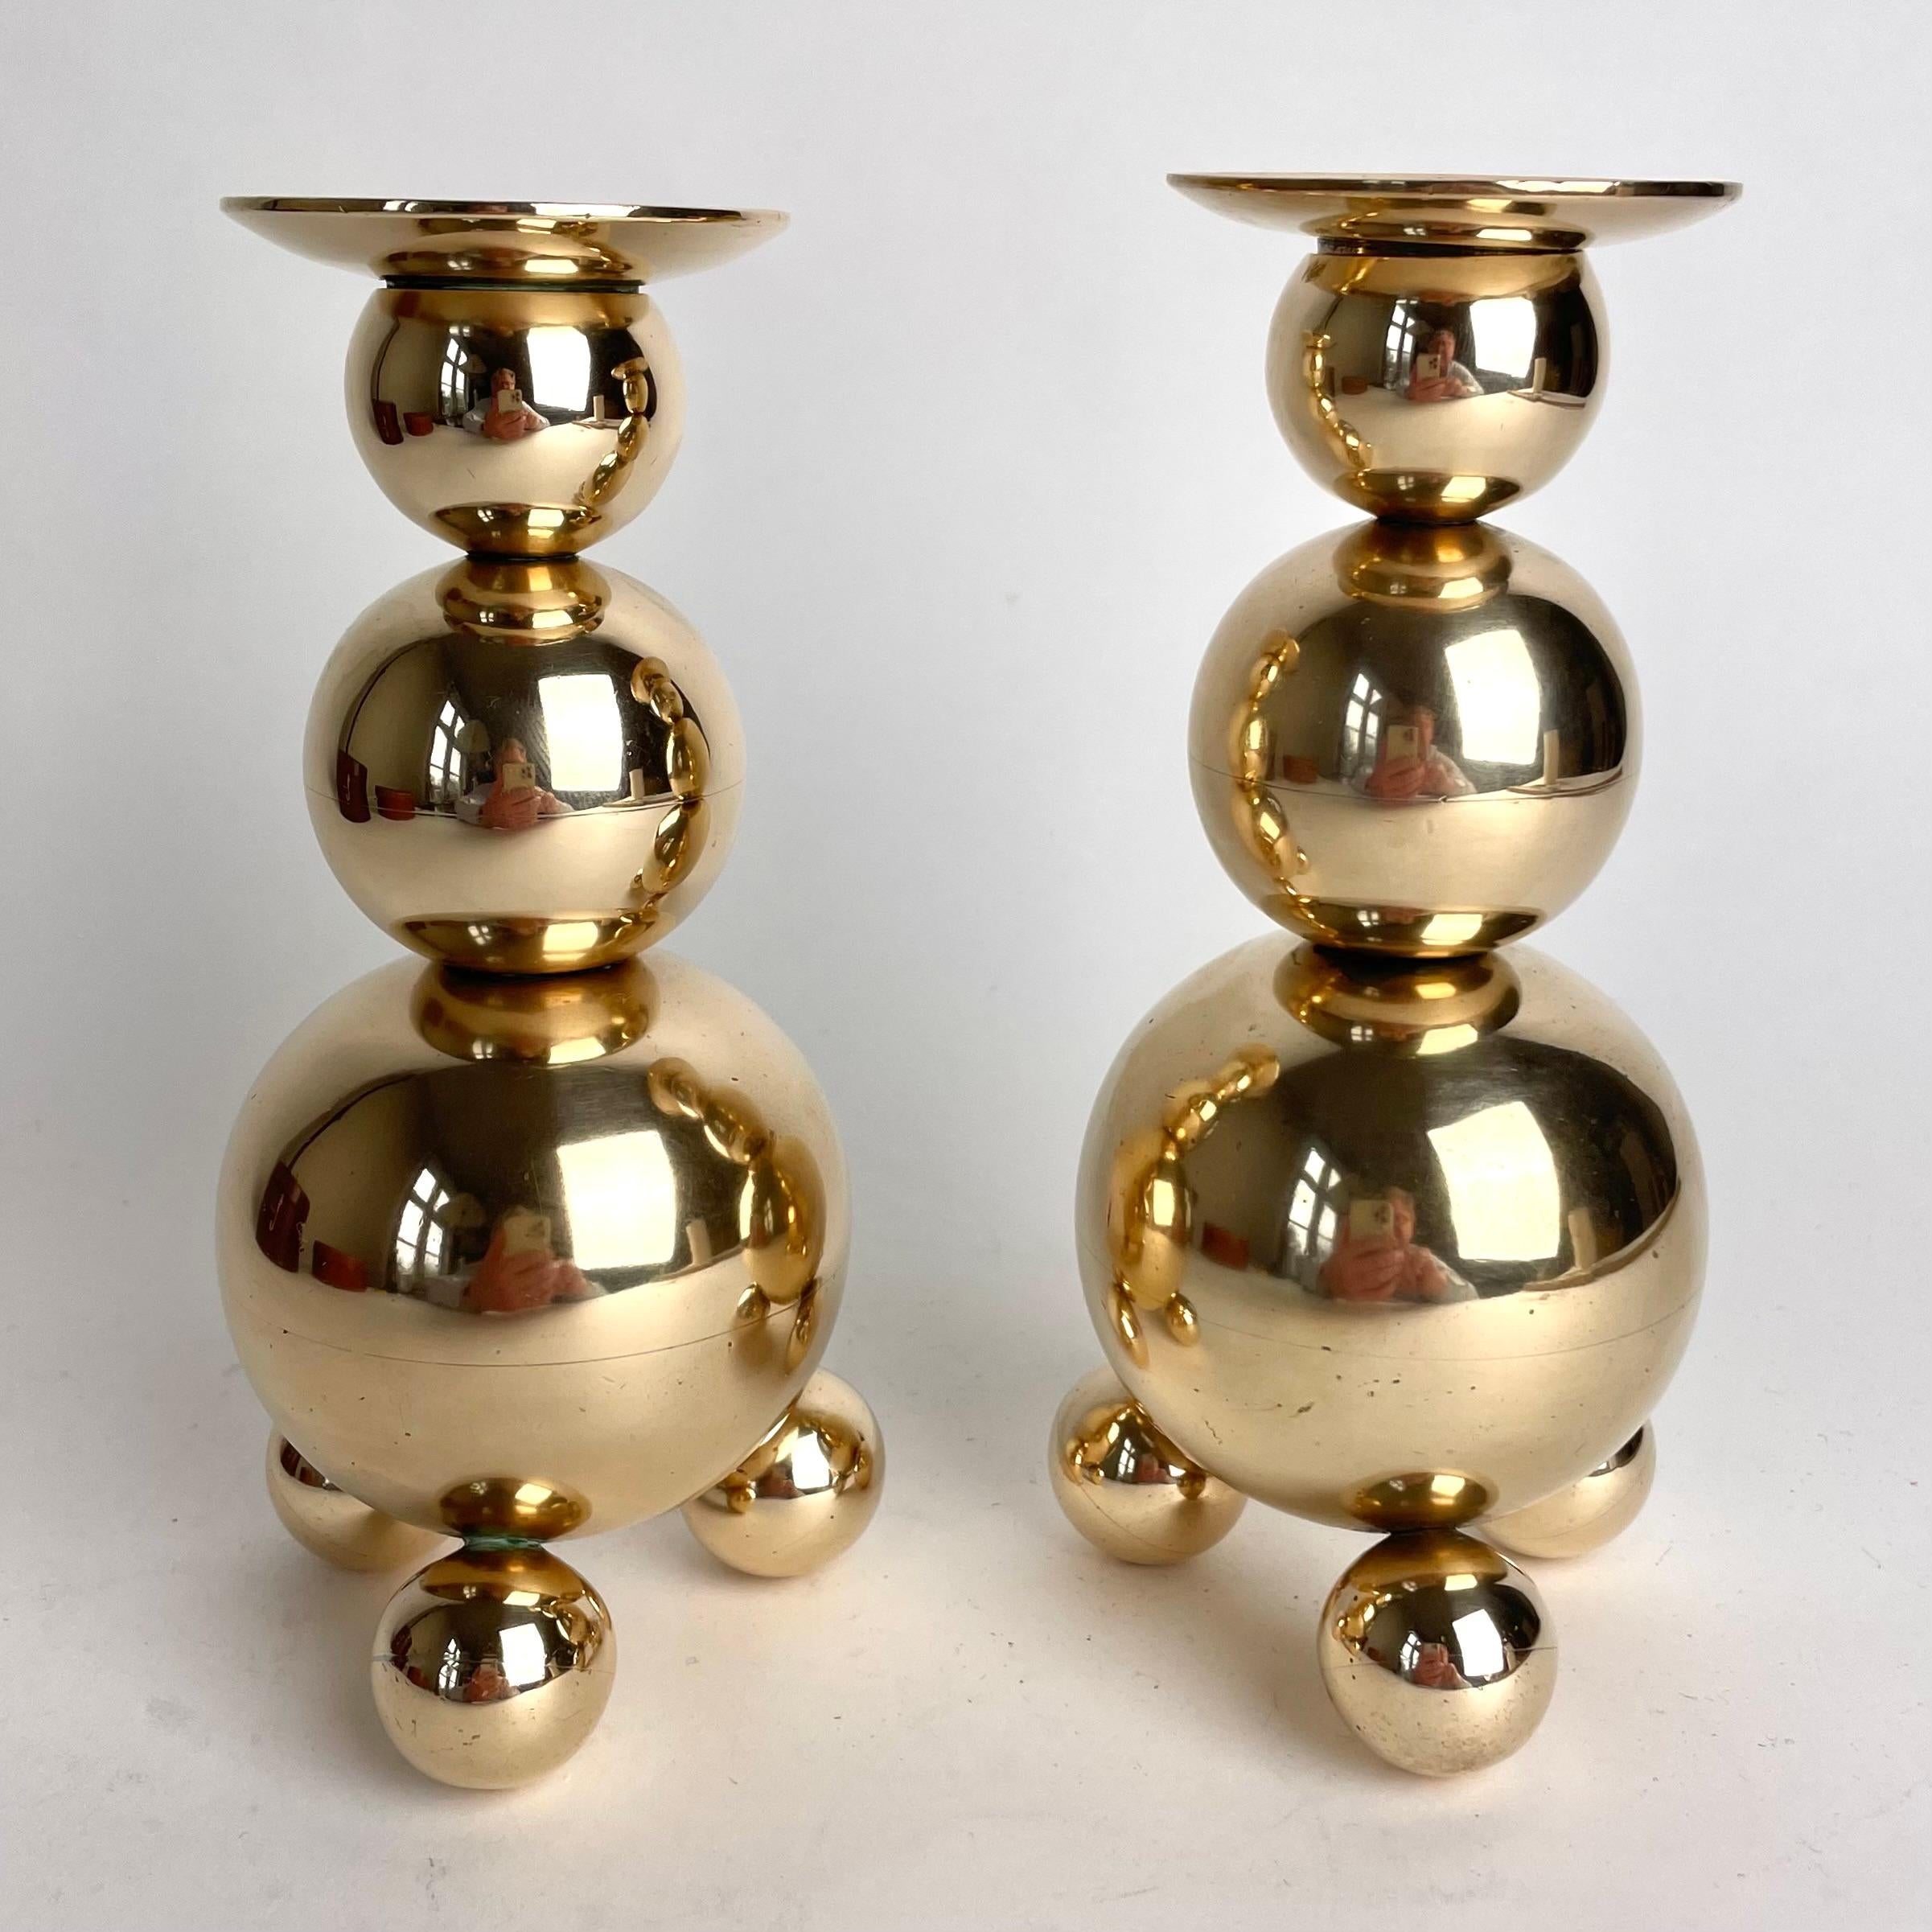 Swedish A pair of Candlesticks from Gusums Bruk in Sweden from the early 20th Century